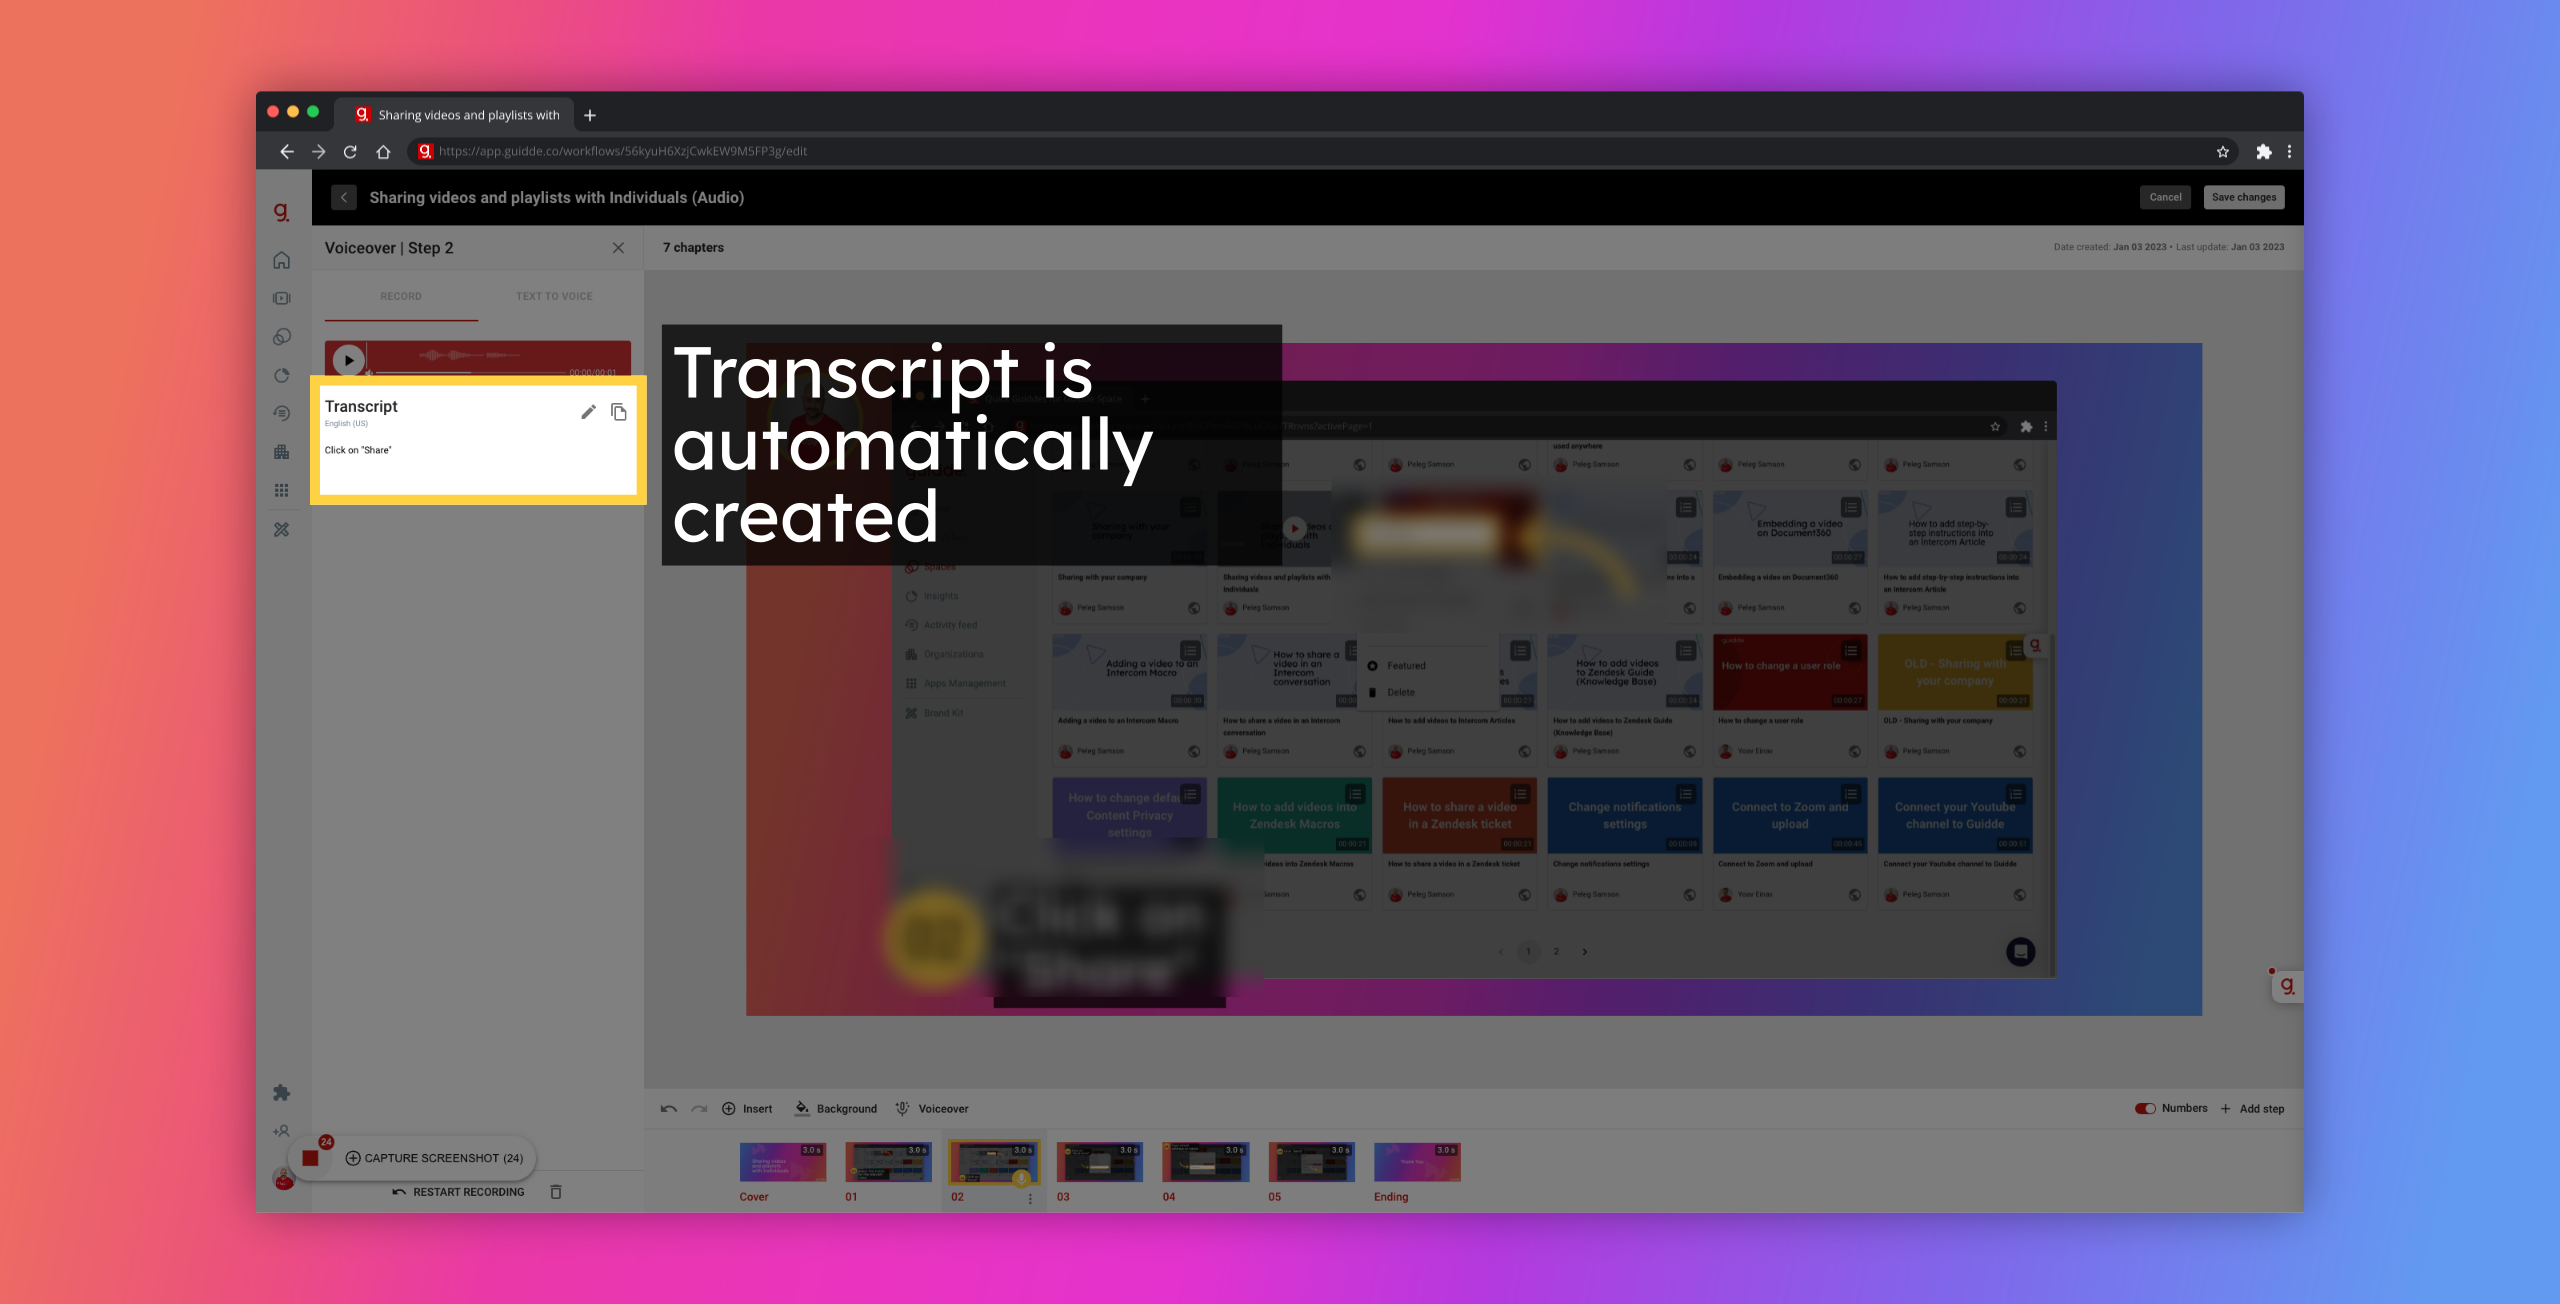 Transcript is automatically created